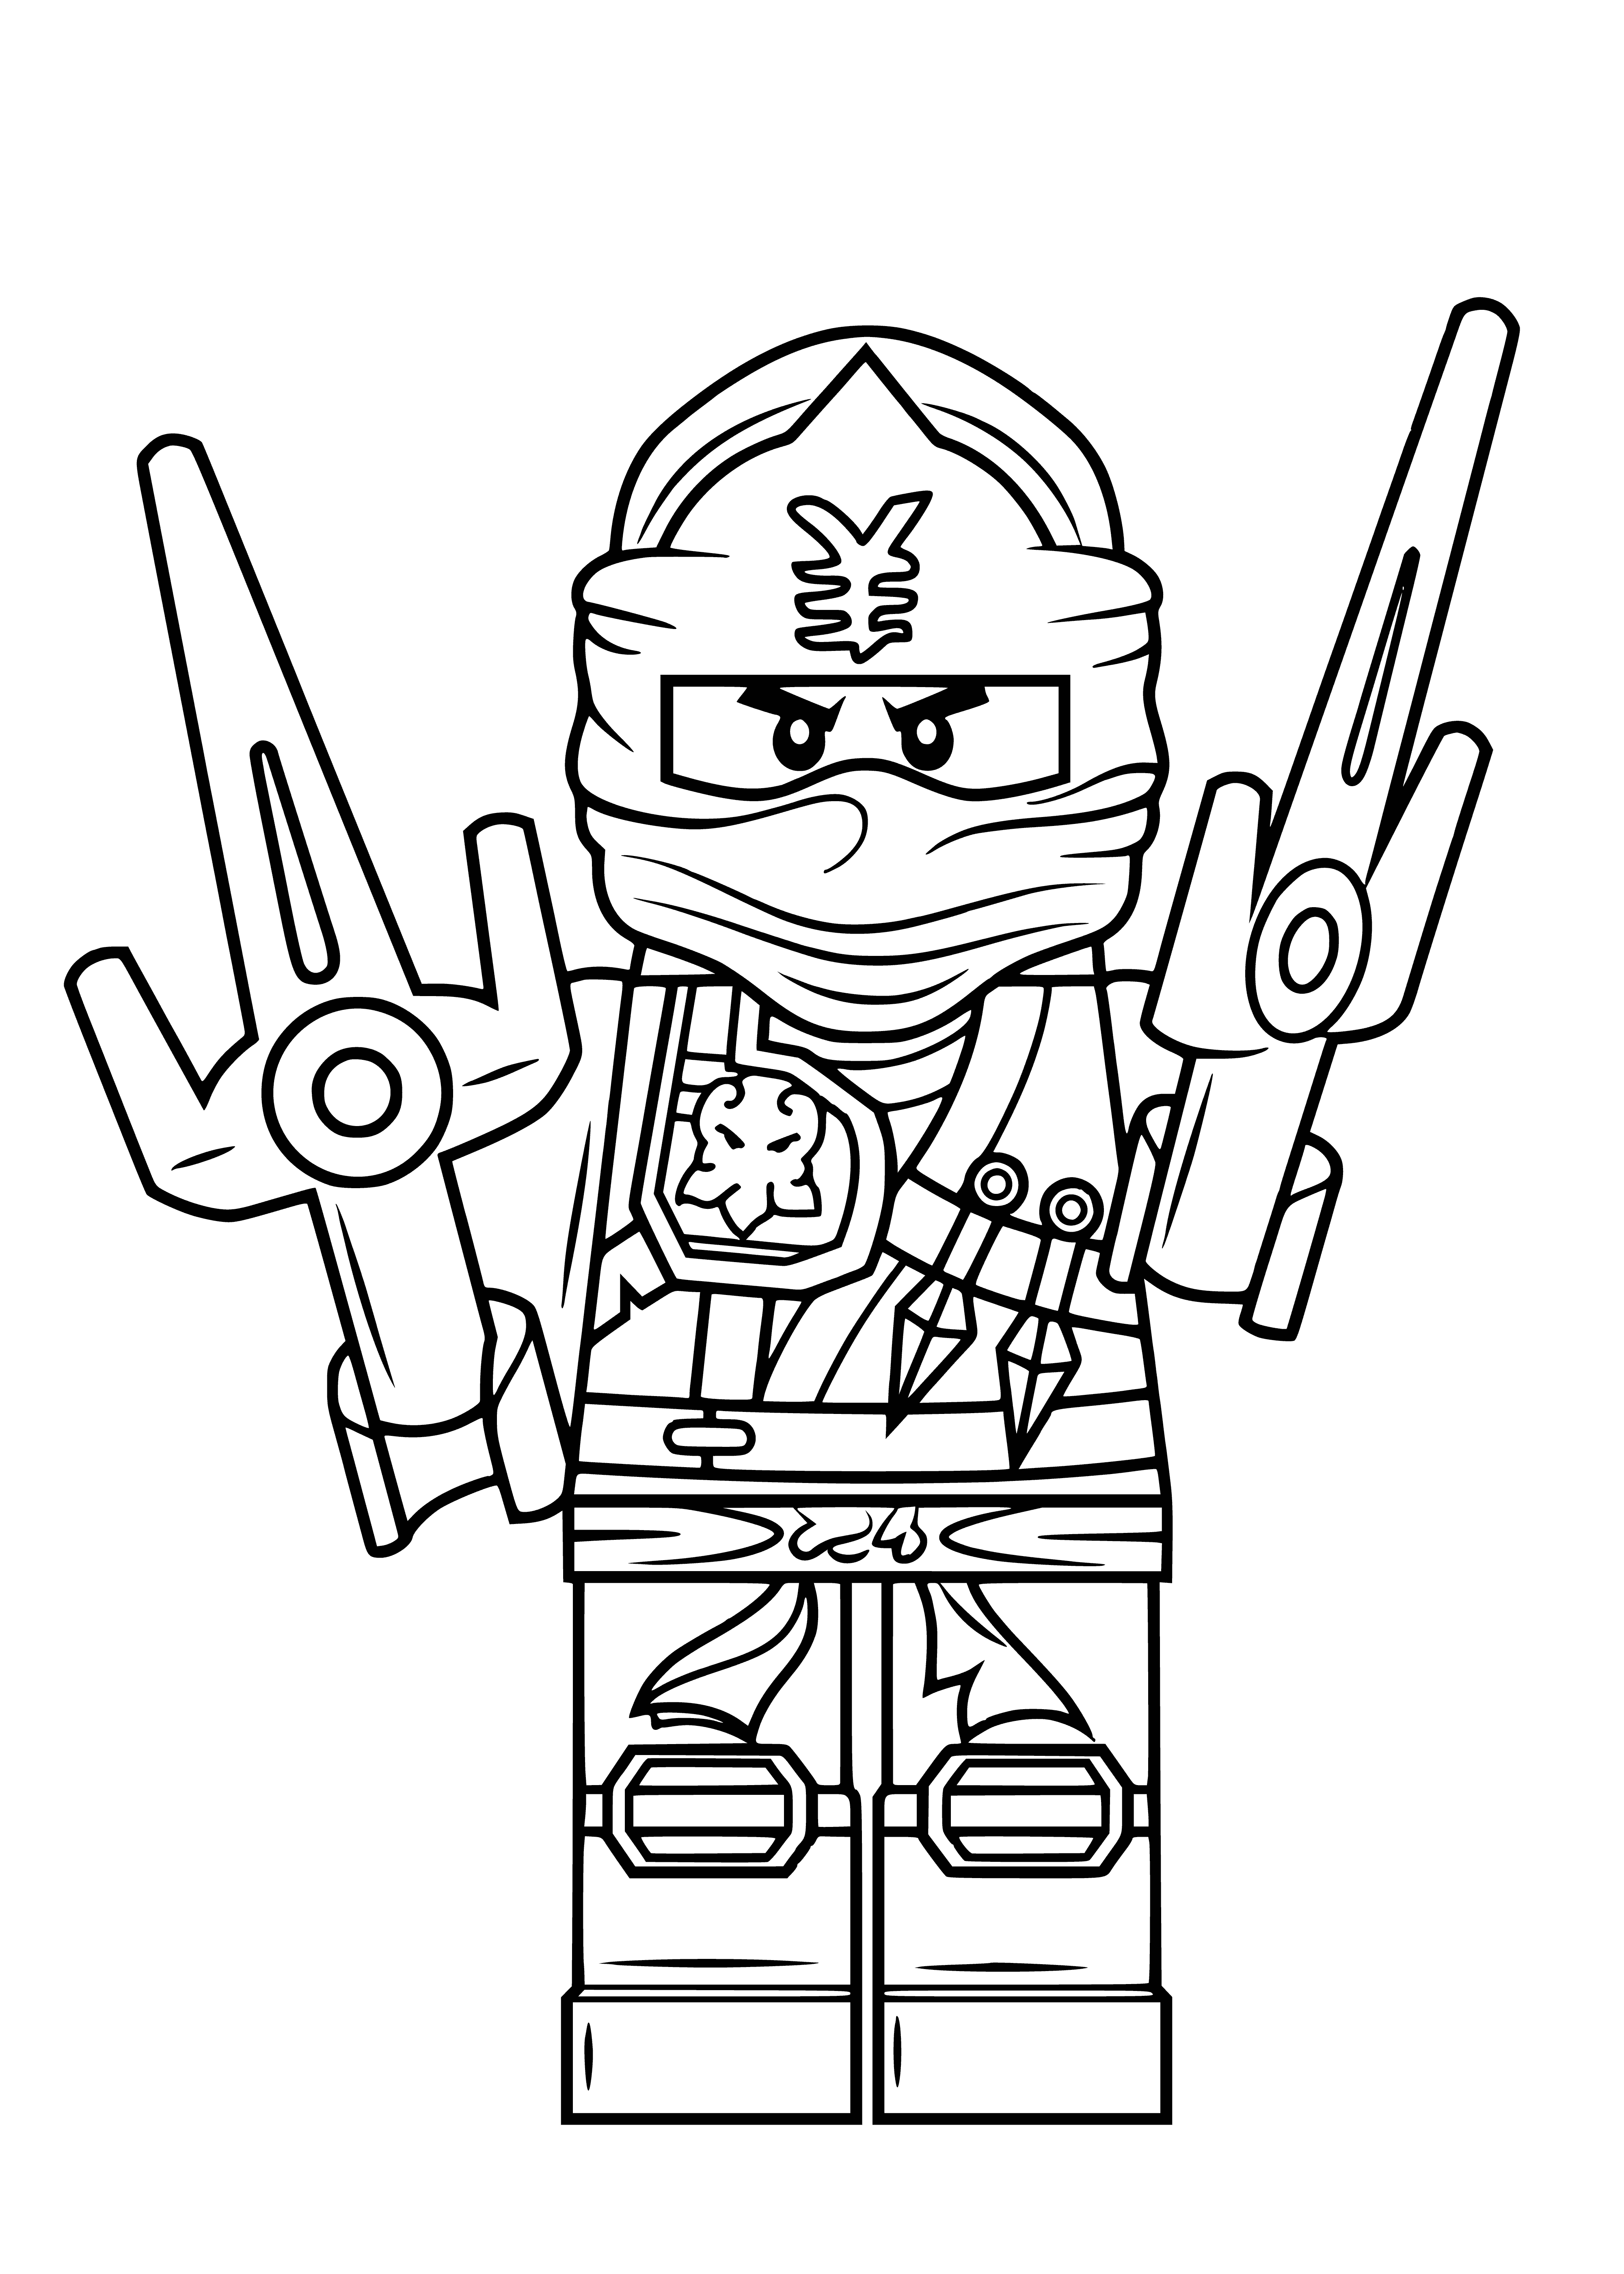 coloring page: LEGO minifigure Jay in blue ninja outfit is surrounded by red and yellow ninjas in battle scene. #ColoringPage #LEGONinjago #Ninjas